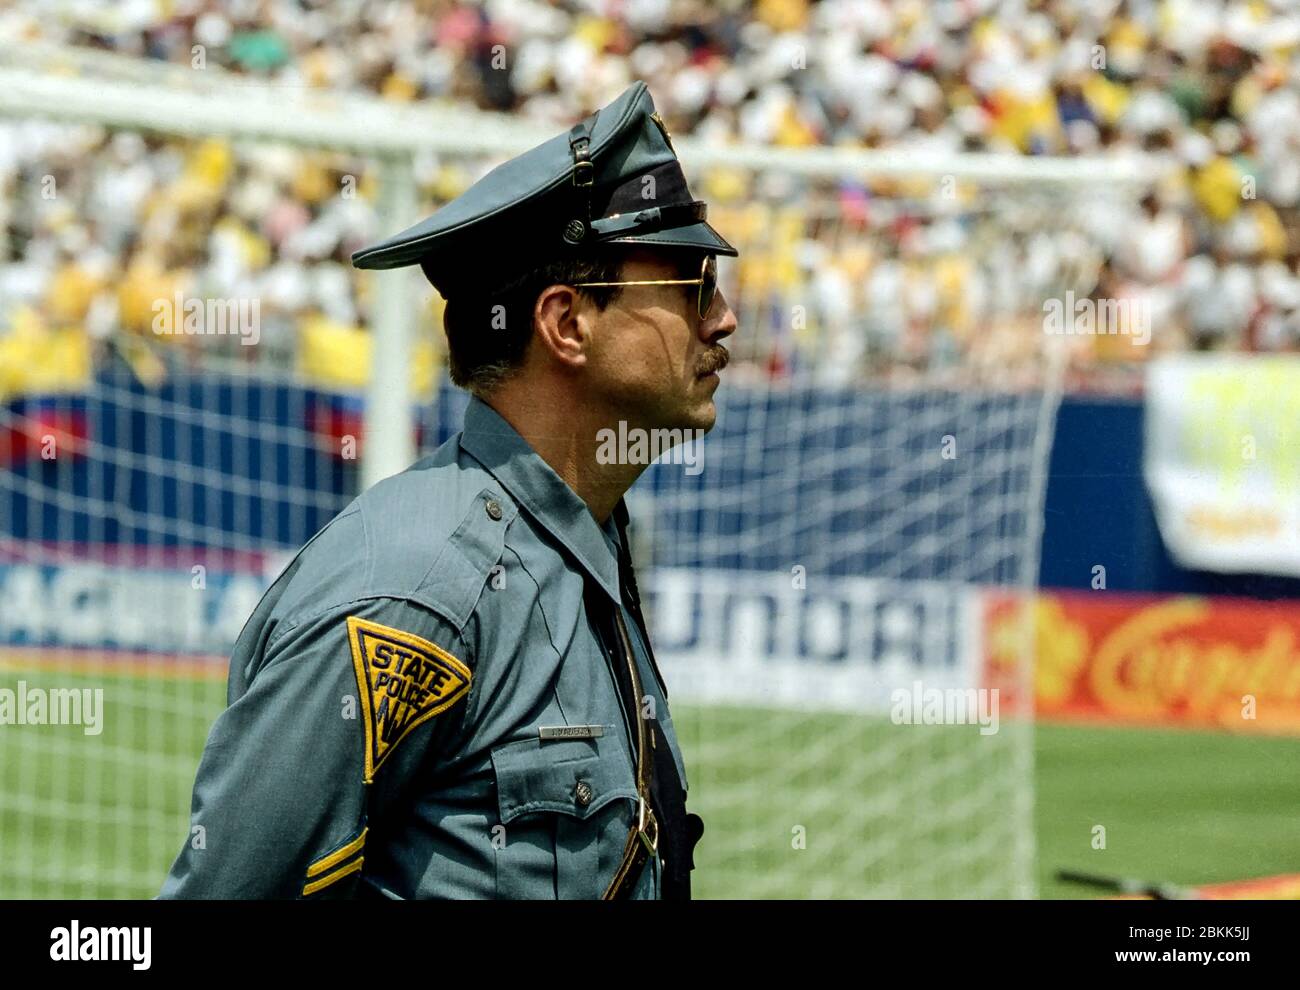 New Jersey State Trooper on duty Stock Photo